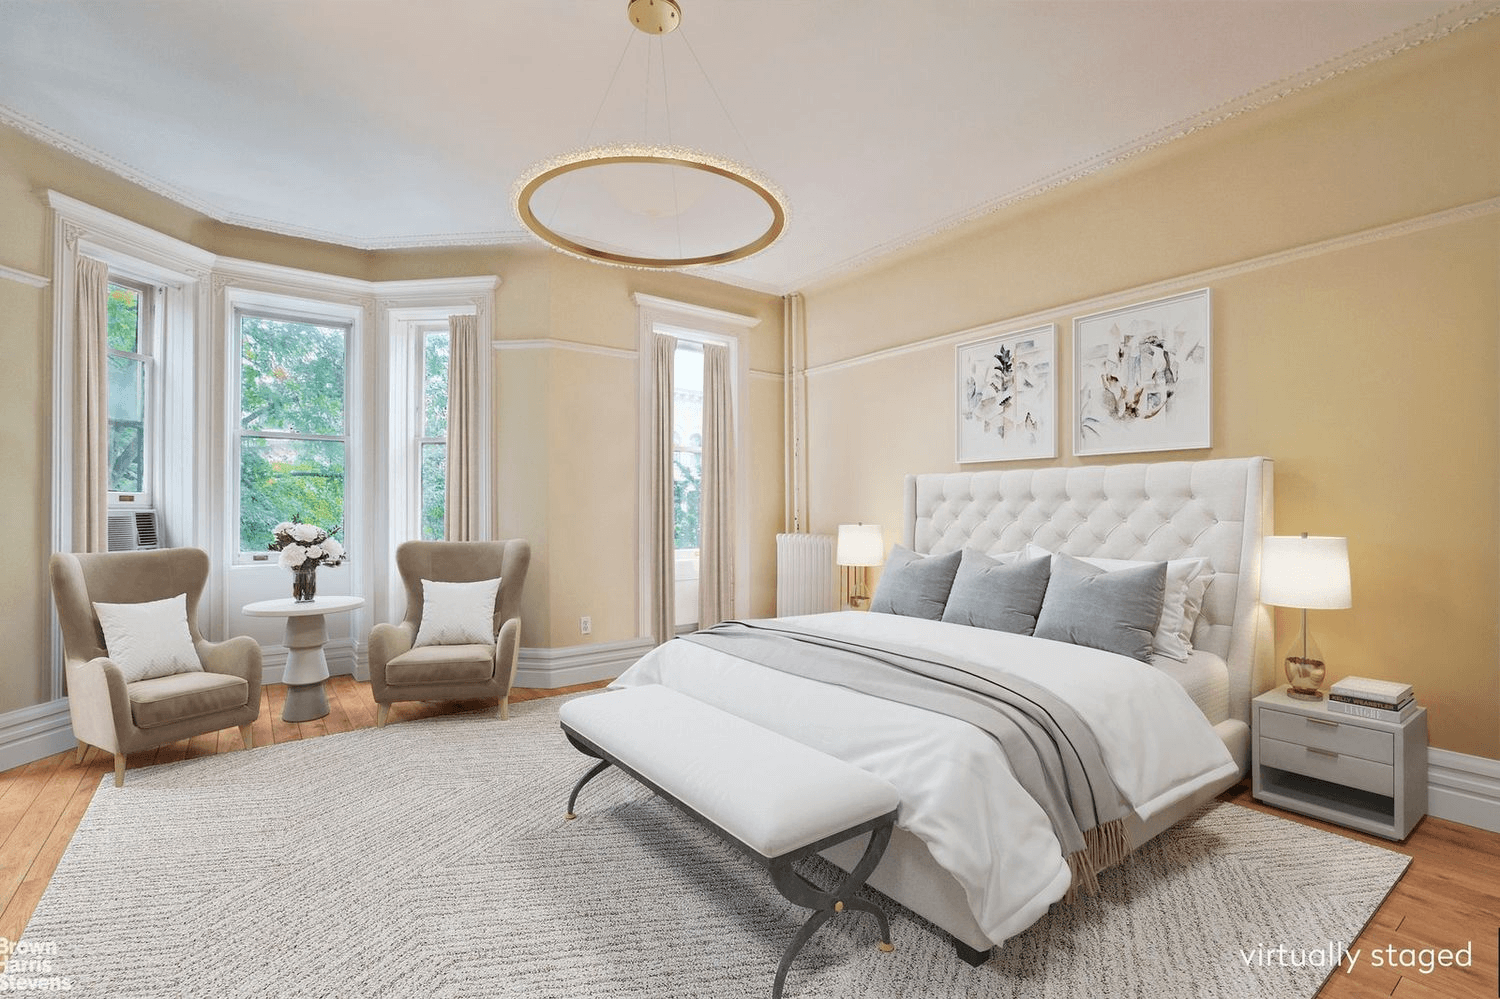 virtually staged bedroom